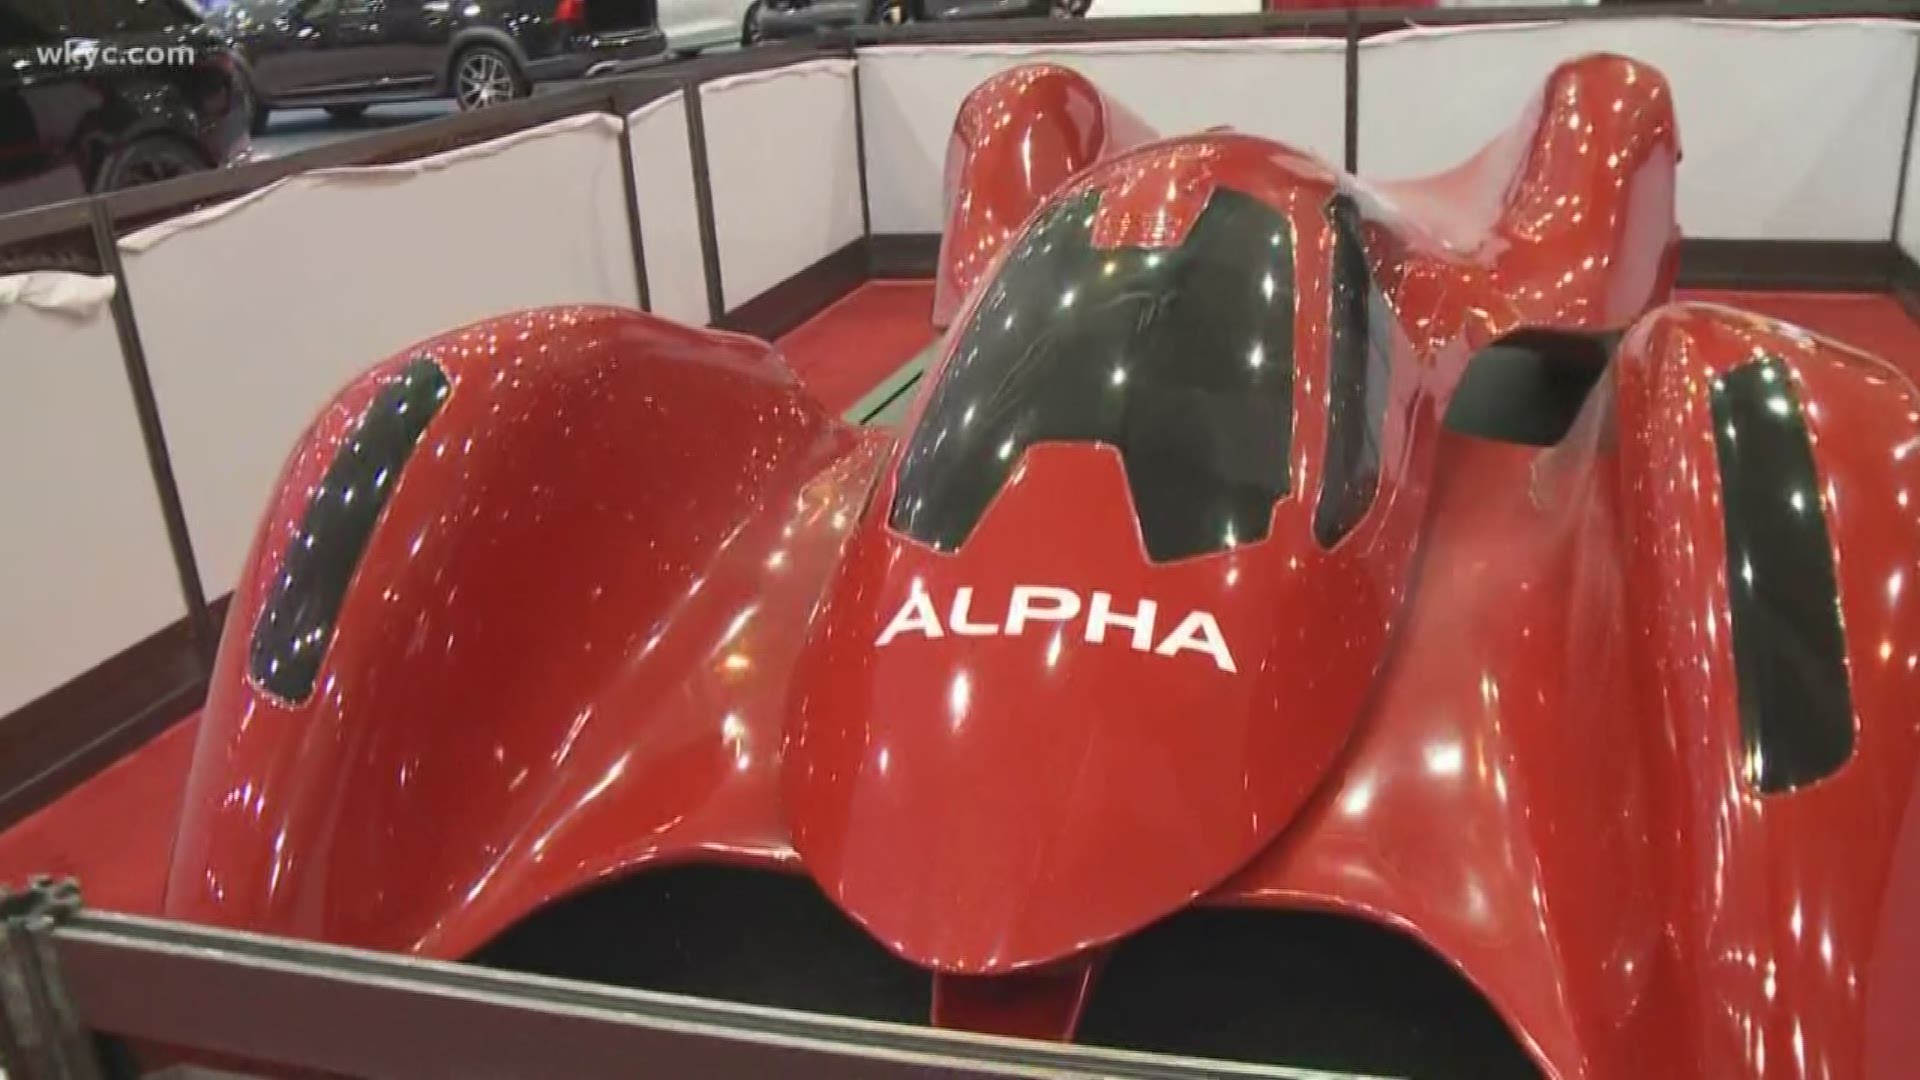 The Auto Show Alpha makes its Ohio debut at the 2020 Cleveland Auto Show. This concept car is made of high-density foam.